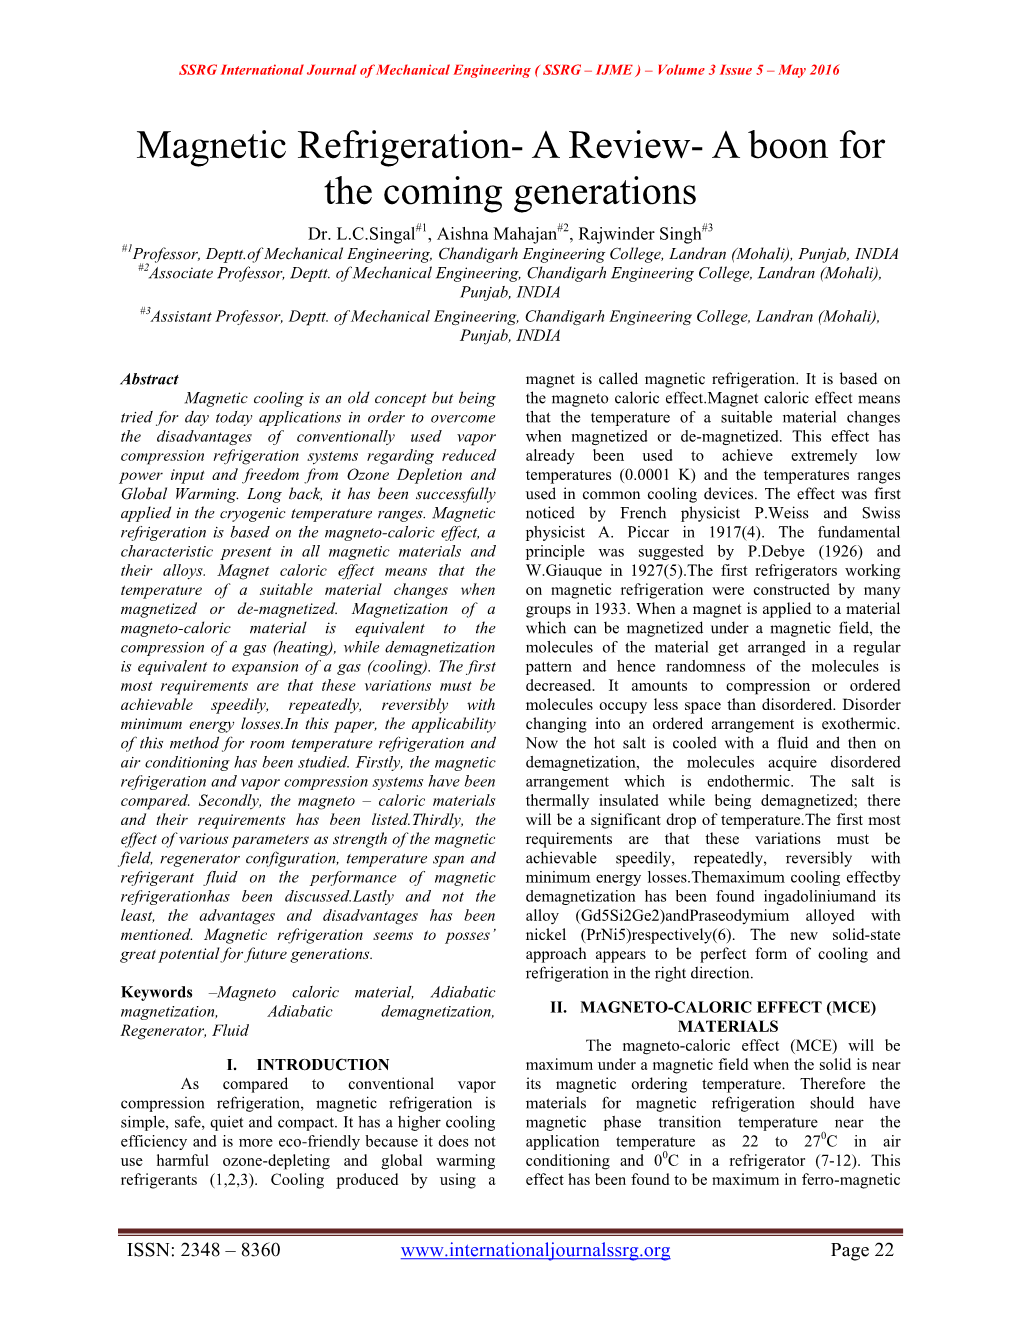 Magnetic Refrigeration- a Review- a Boon for the Coming Generations Dr